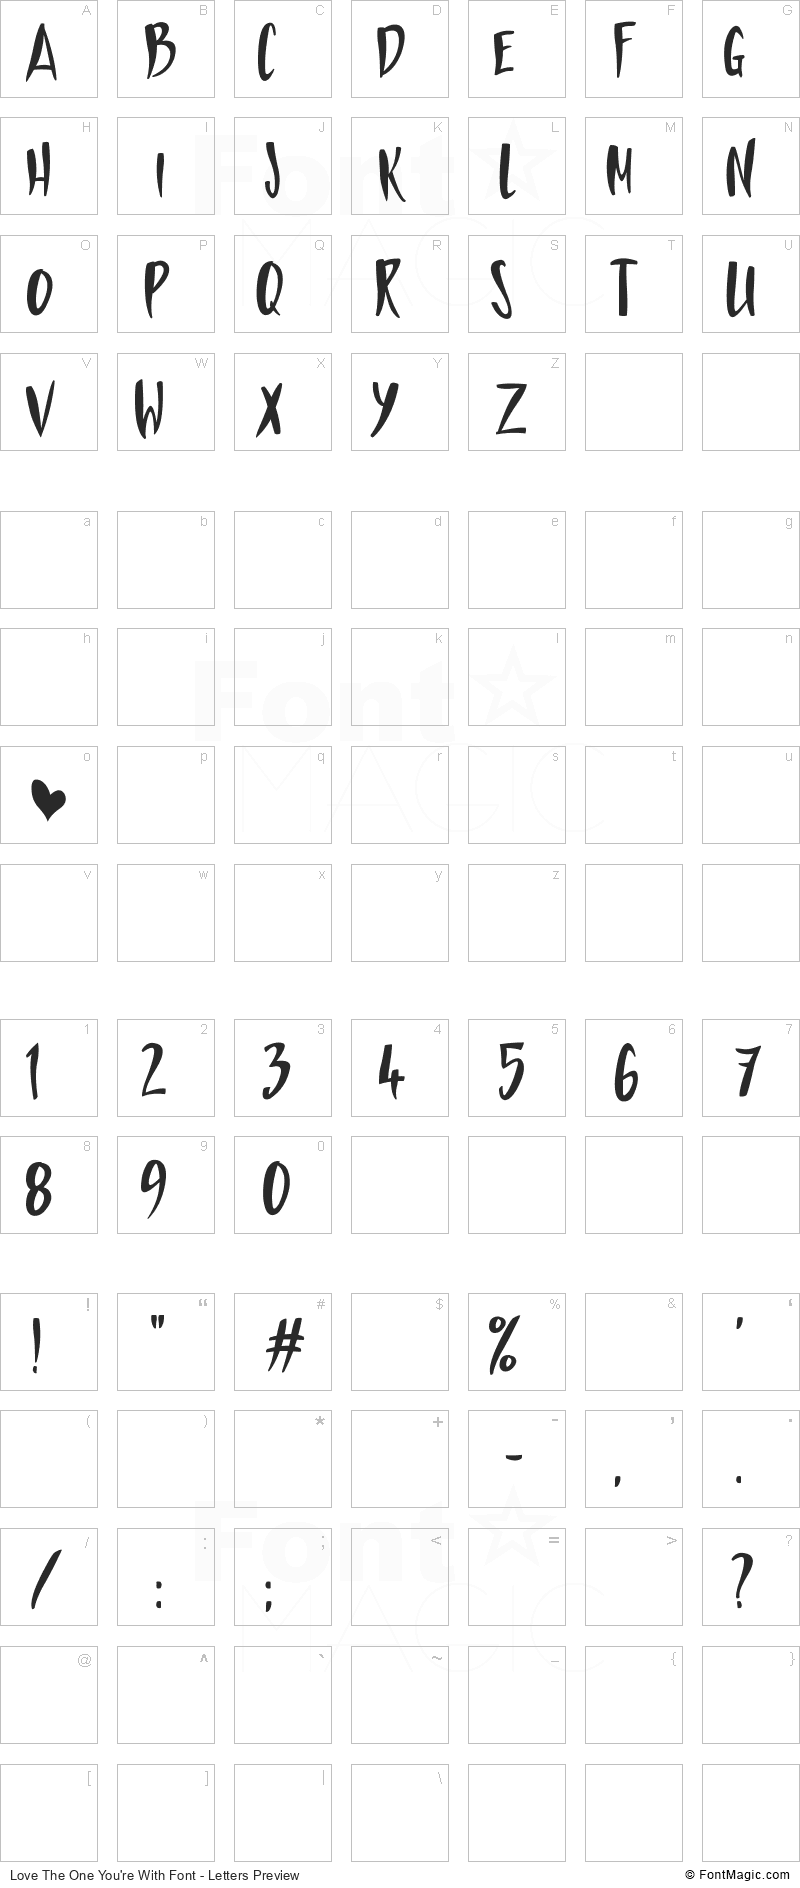 Love The One You’re With Font - All Latters Preview Chart